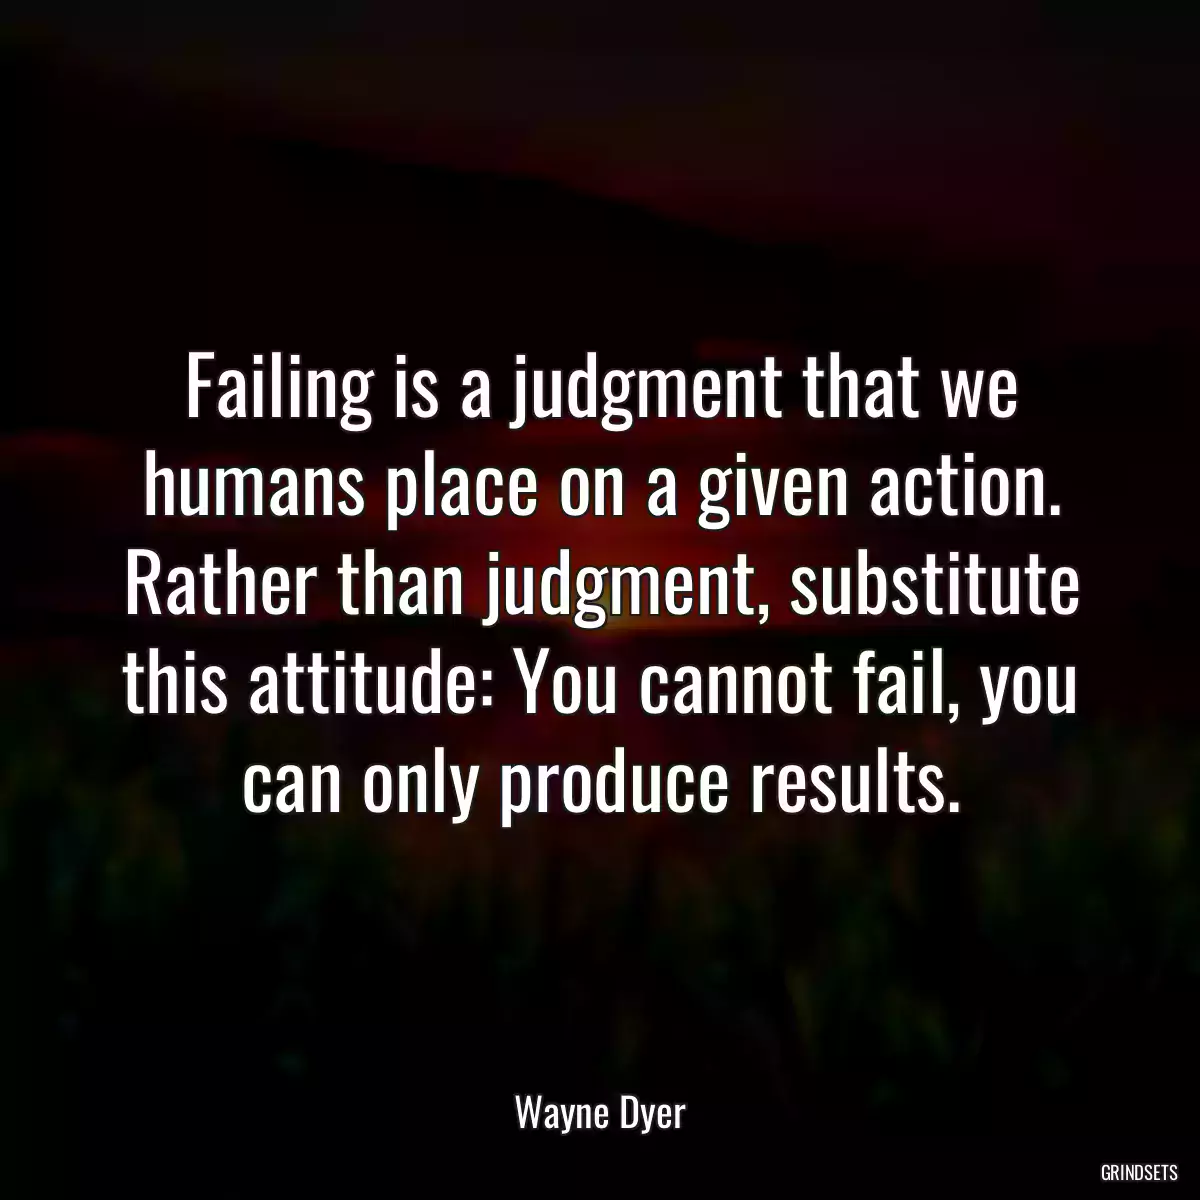 Failing is a judgment that we humans place on a given action. Rather than judgment, substitute this attitude: You cannot fail, you can only produce results.